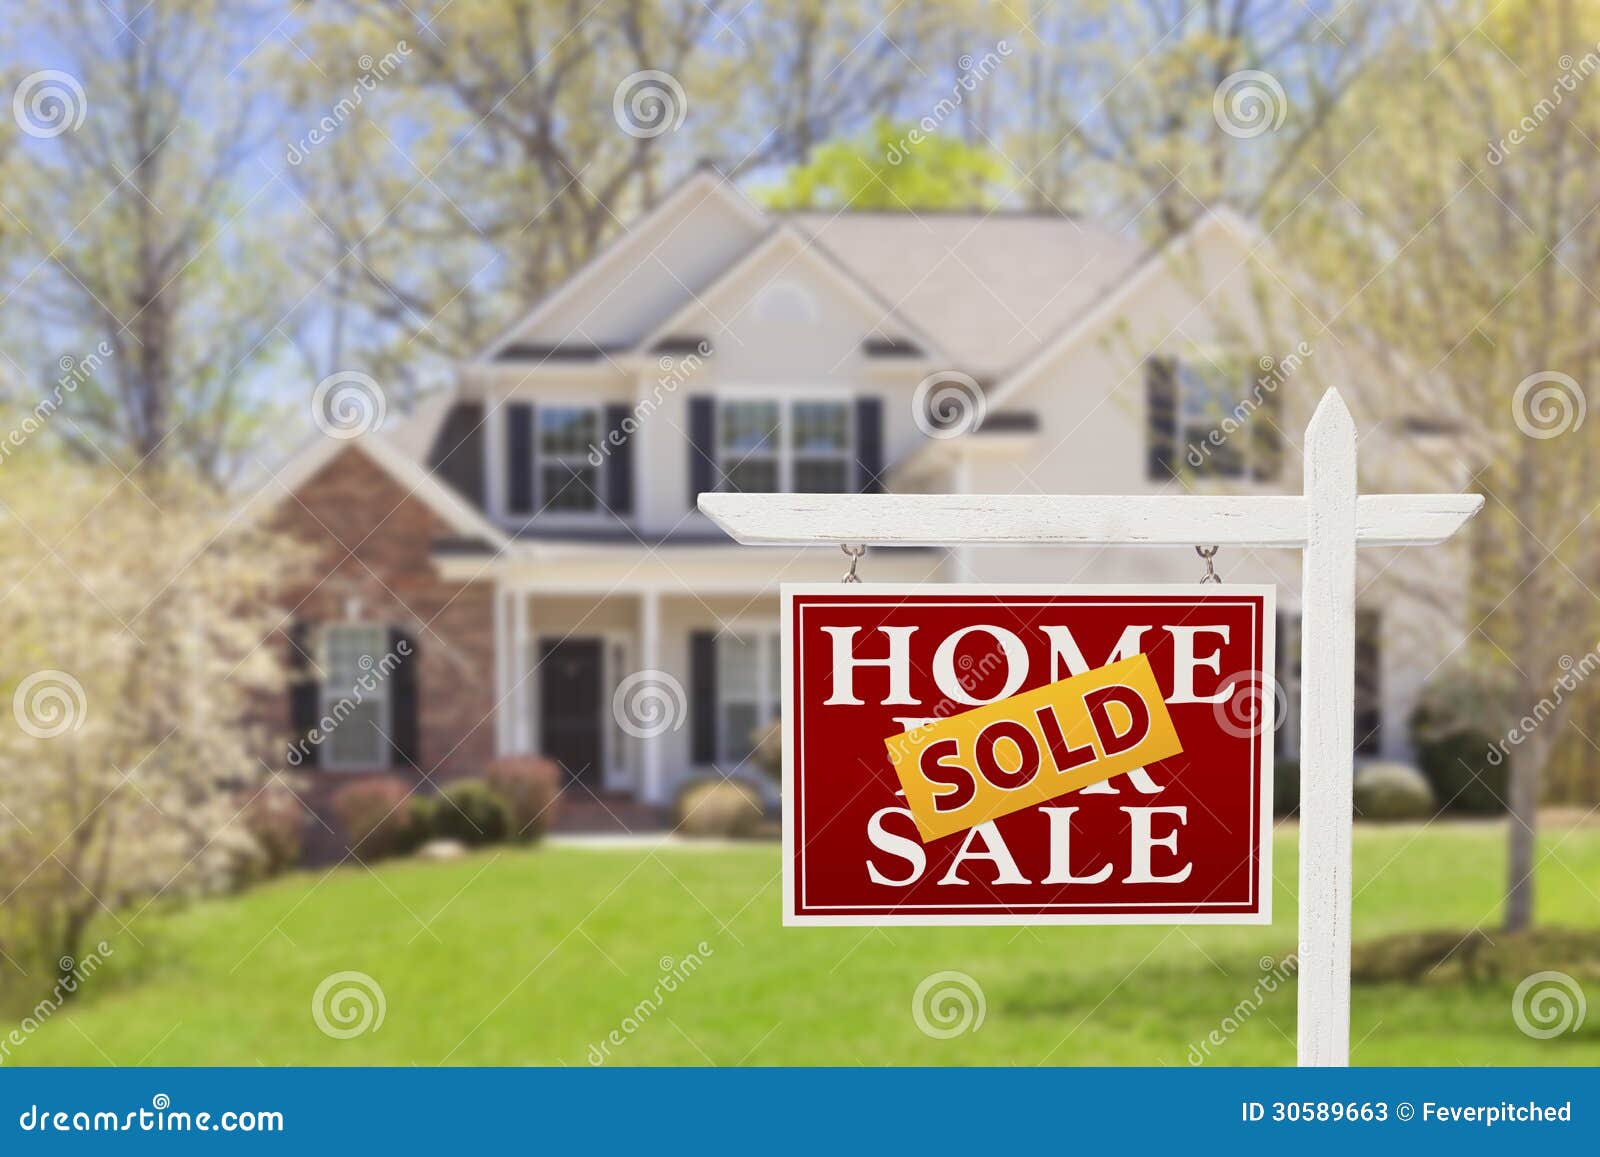 sold home for sale real estate sign and house